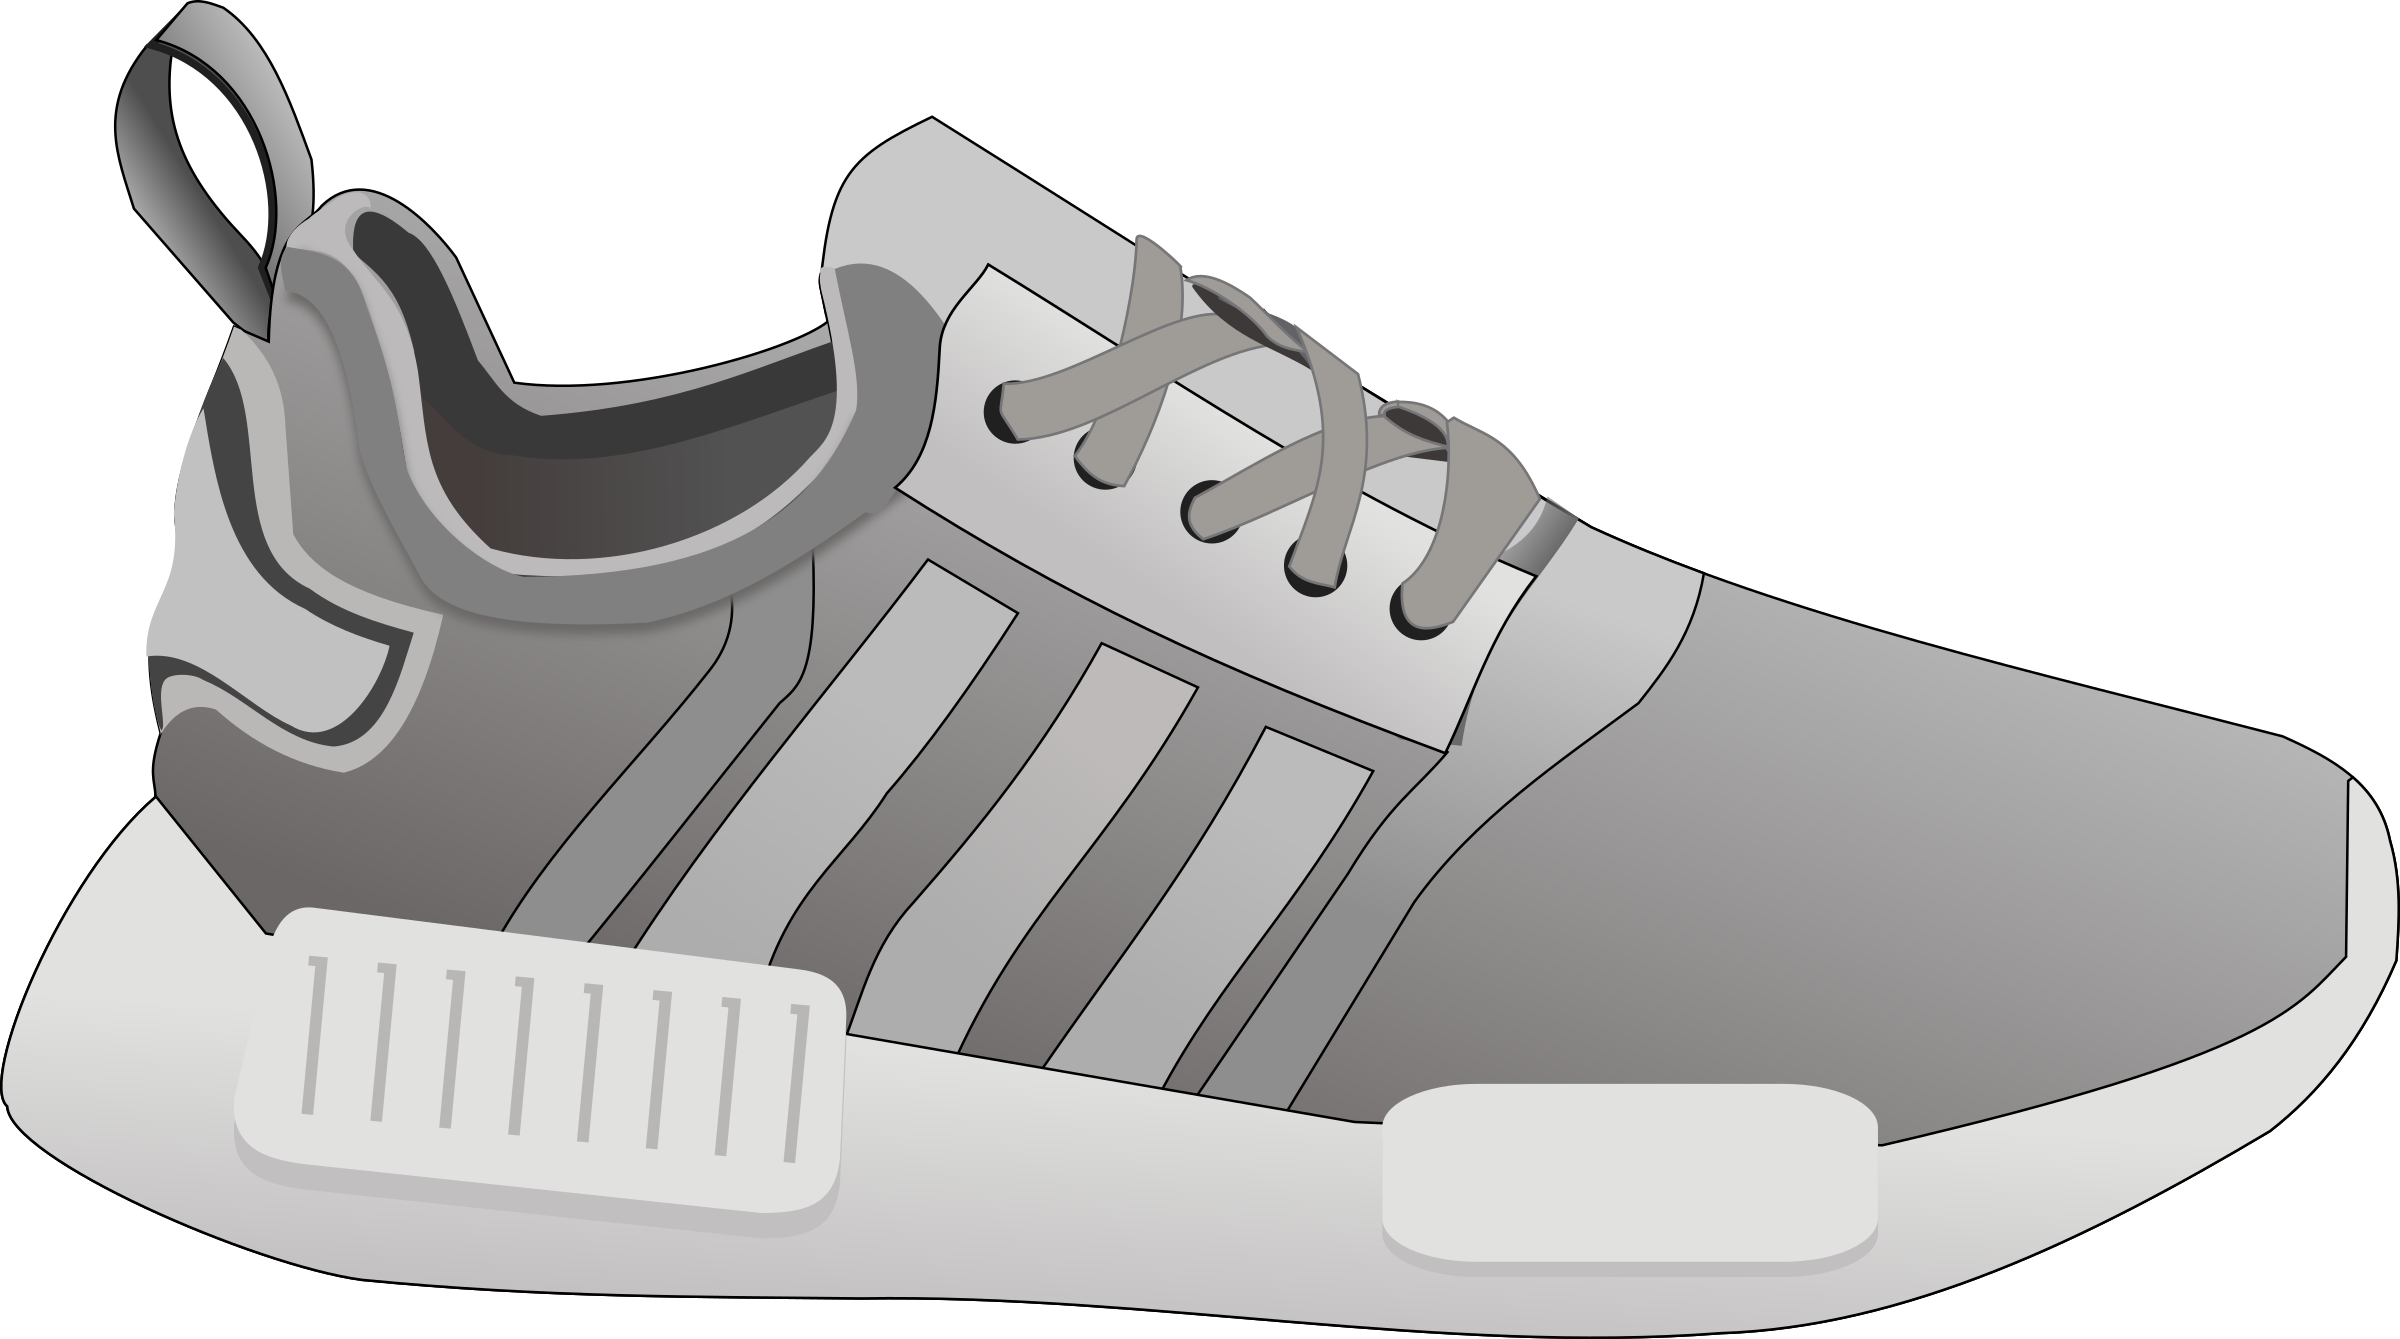 Sneakers Shoe Clip art - sports shoes png download - 2400*1339 - Free ...